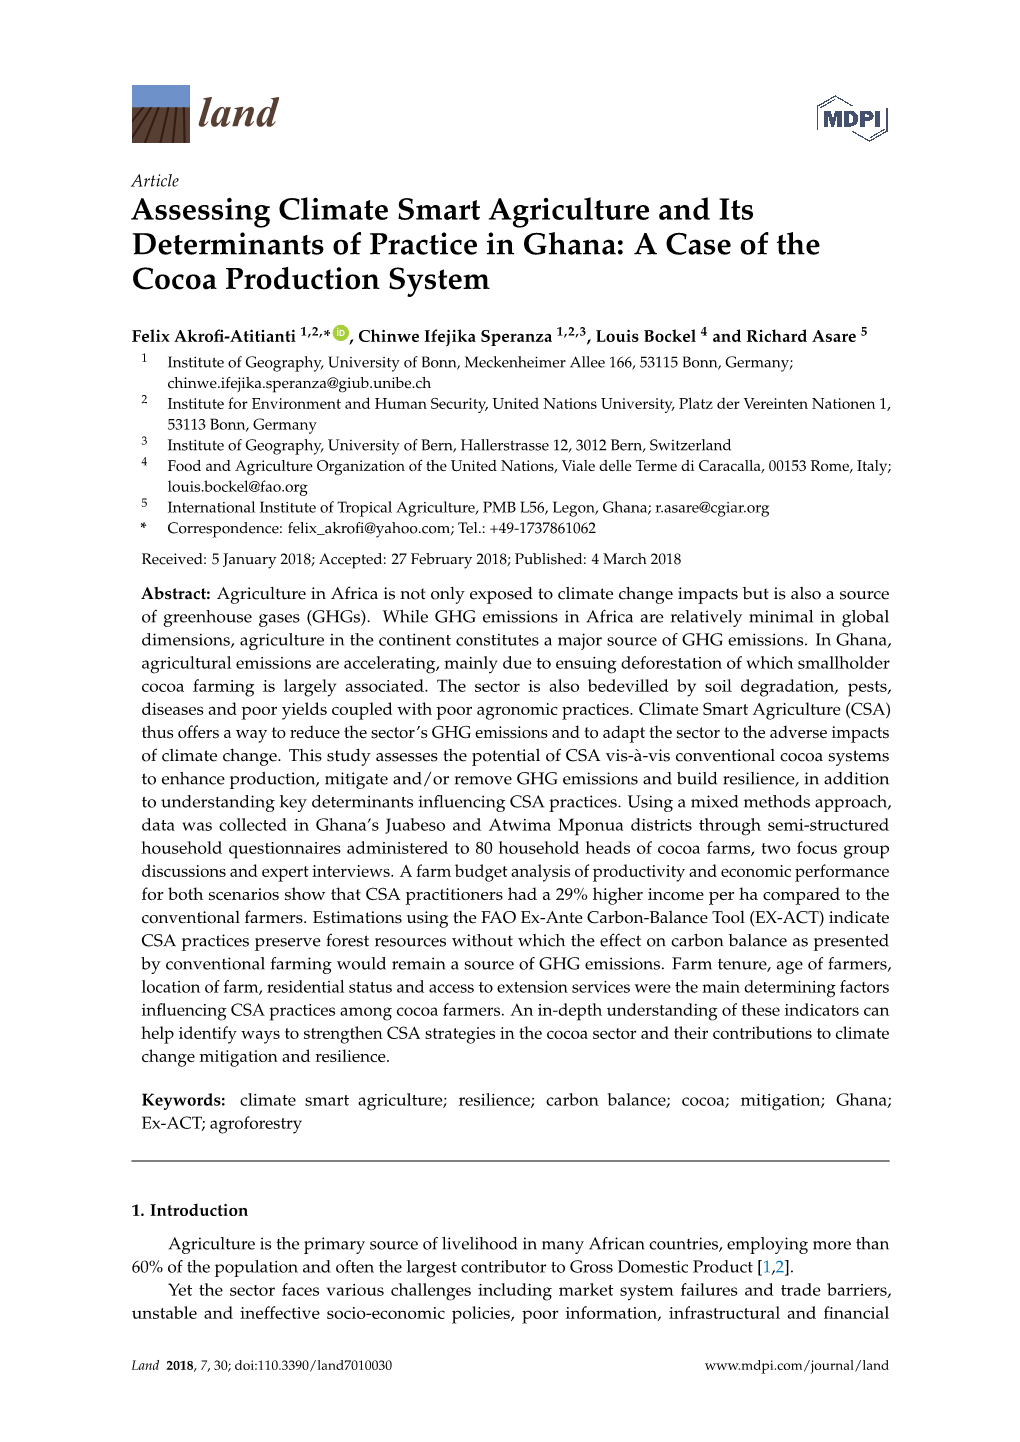 Assessing Climate Smart Agriculture and Its Determinants of Practice in Ghana: a Case of the Cocoa Production System